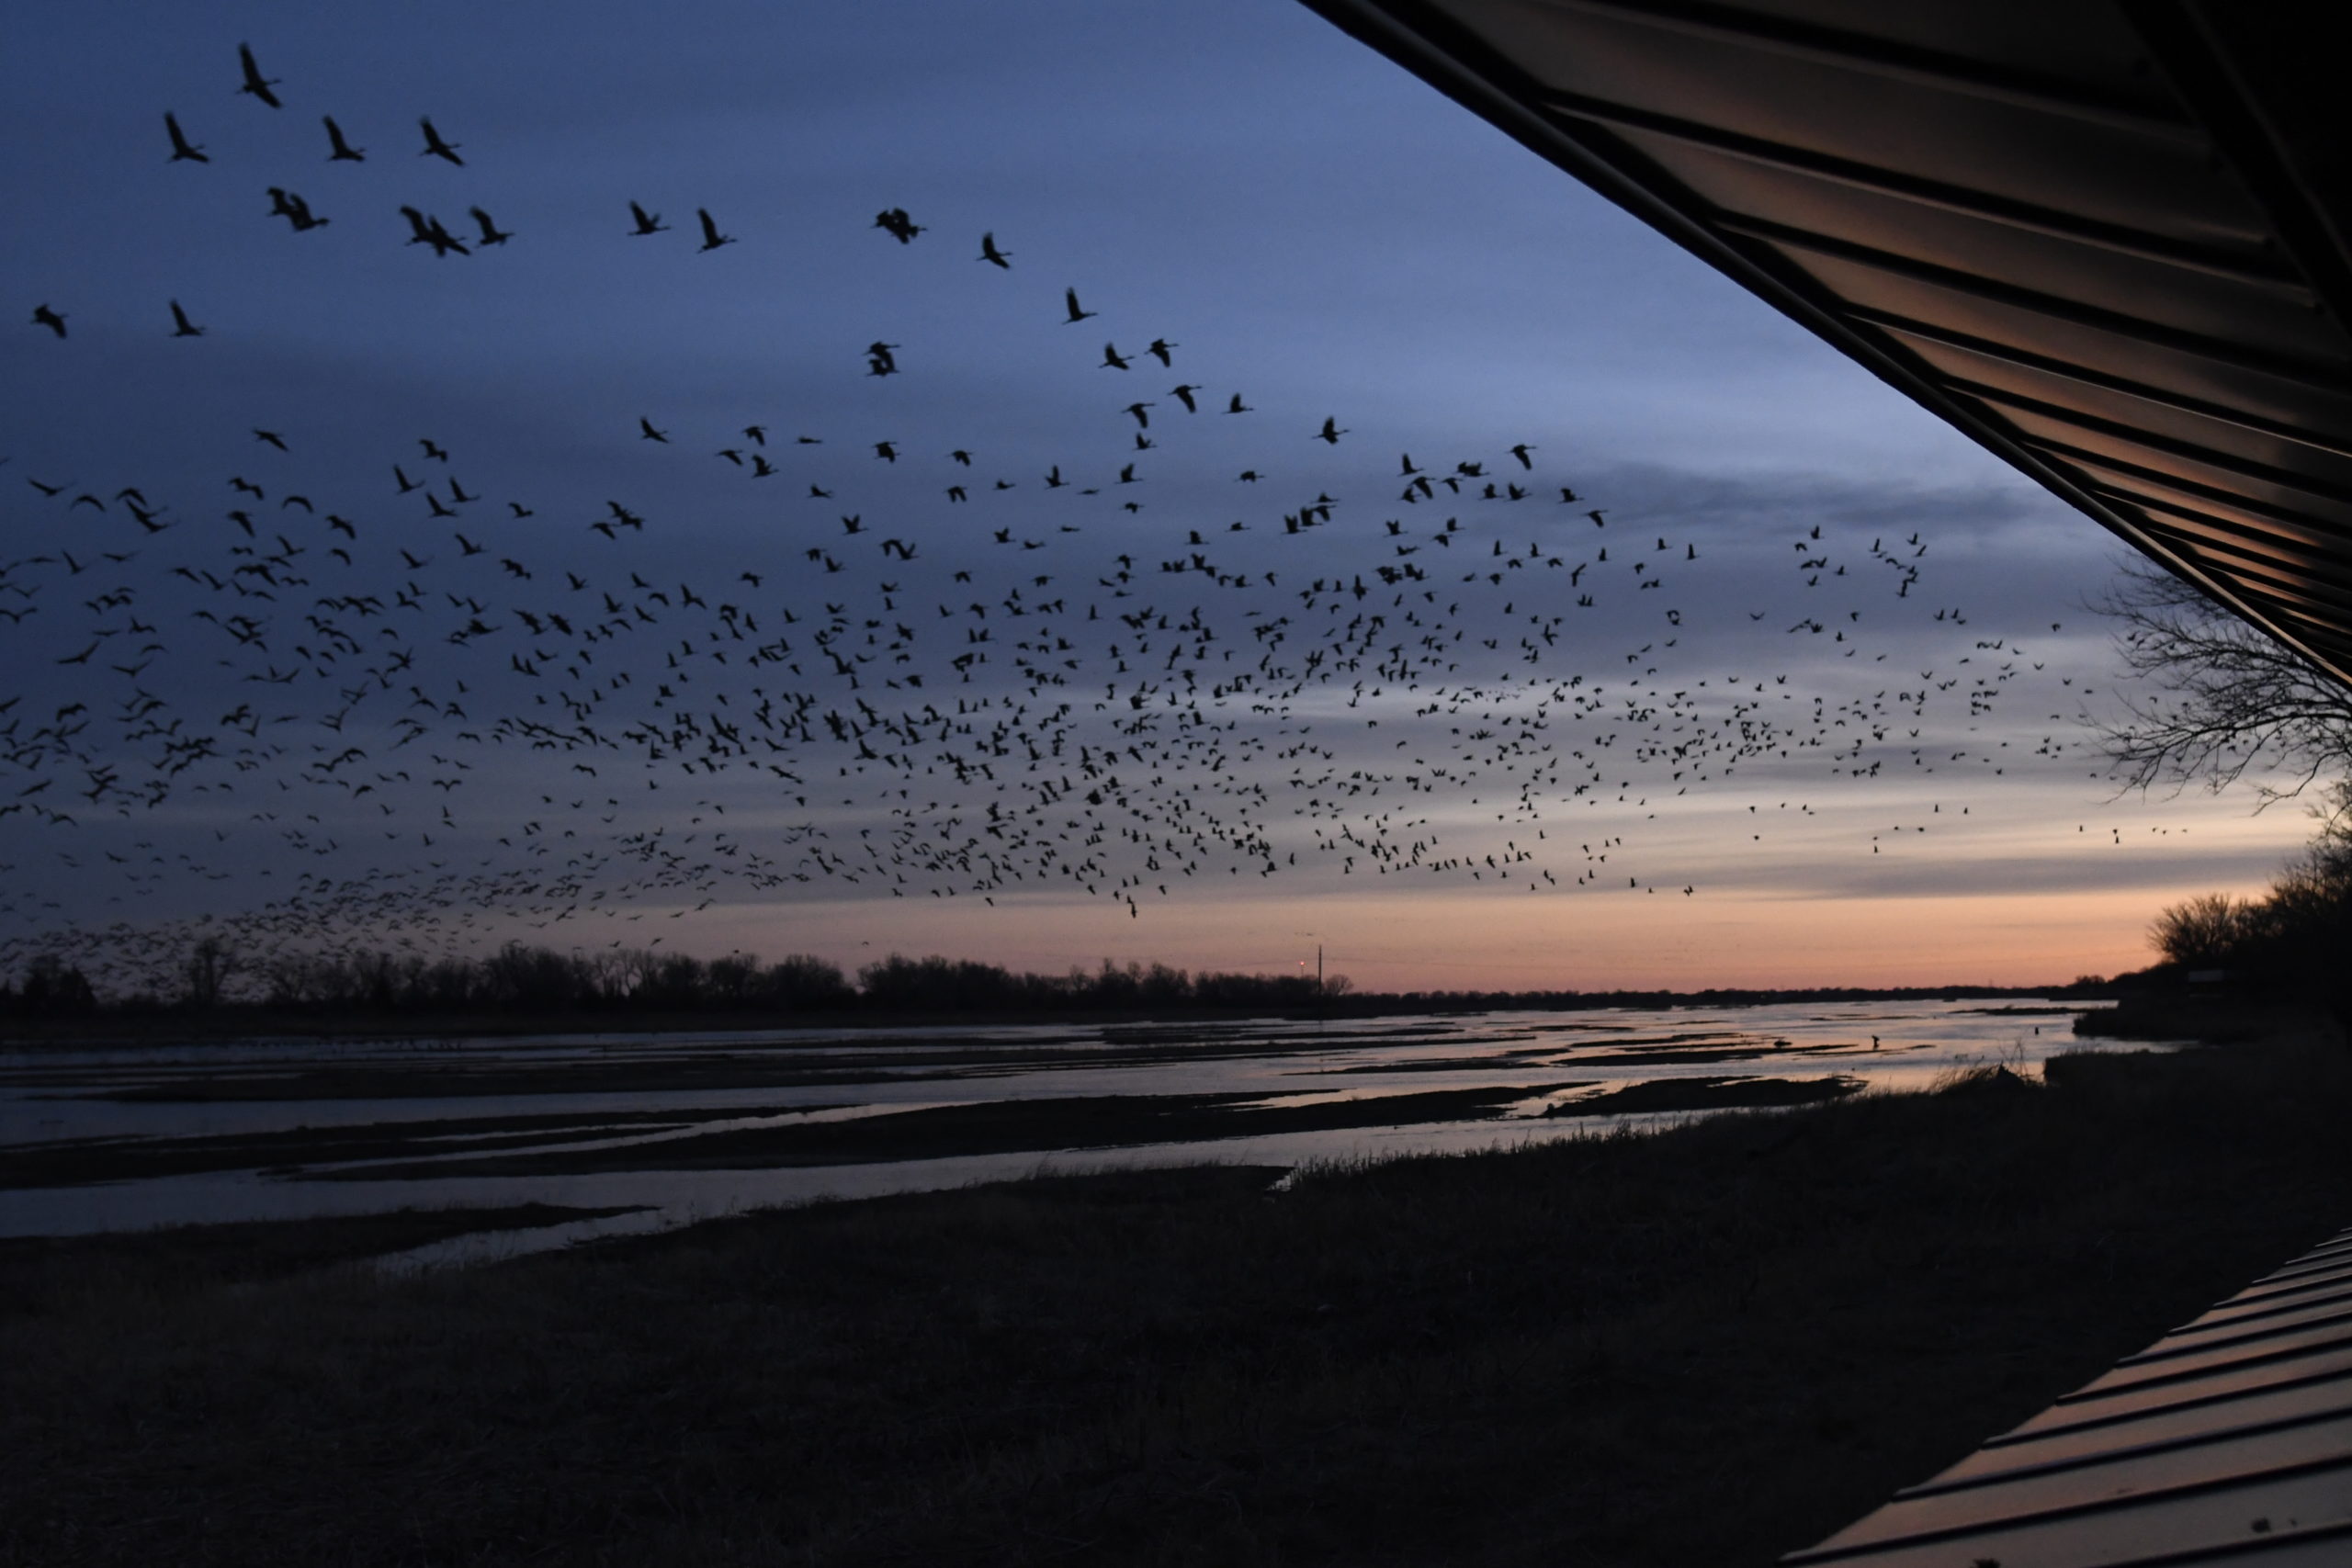 The view from our group’s blind as Sandhill Cranes depart the Rowe Sanctuary along the Platte River outside Kearney, Neb., Sunday, March 20, 2022. The thousands of cranes will work the fields and along the river all day, bulking up for the next leg of their spring migration, which could take hem as far as Siberia. (Photo by Brian Horton)